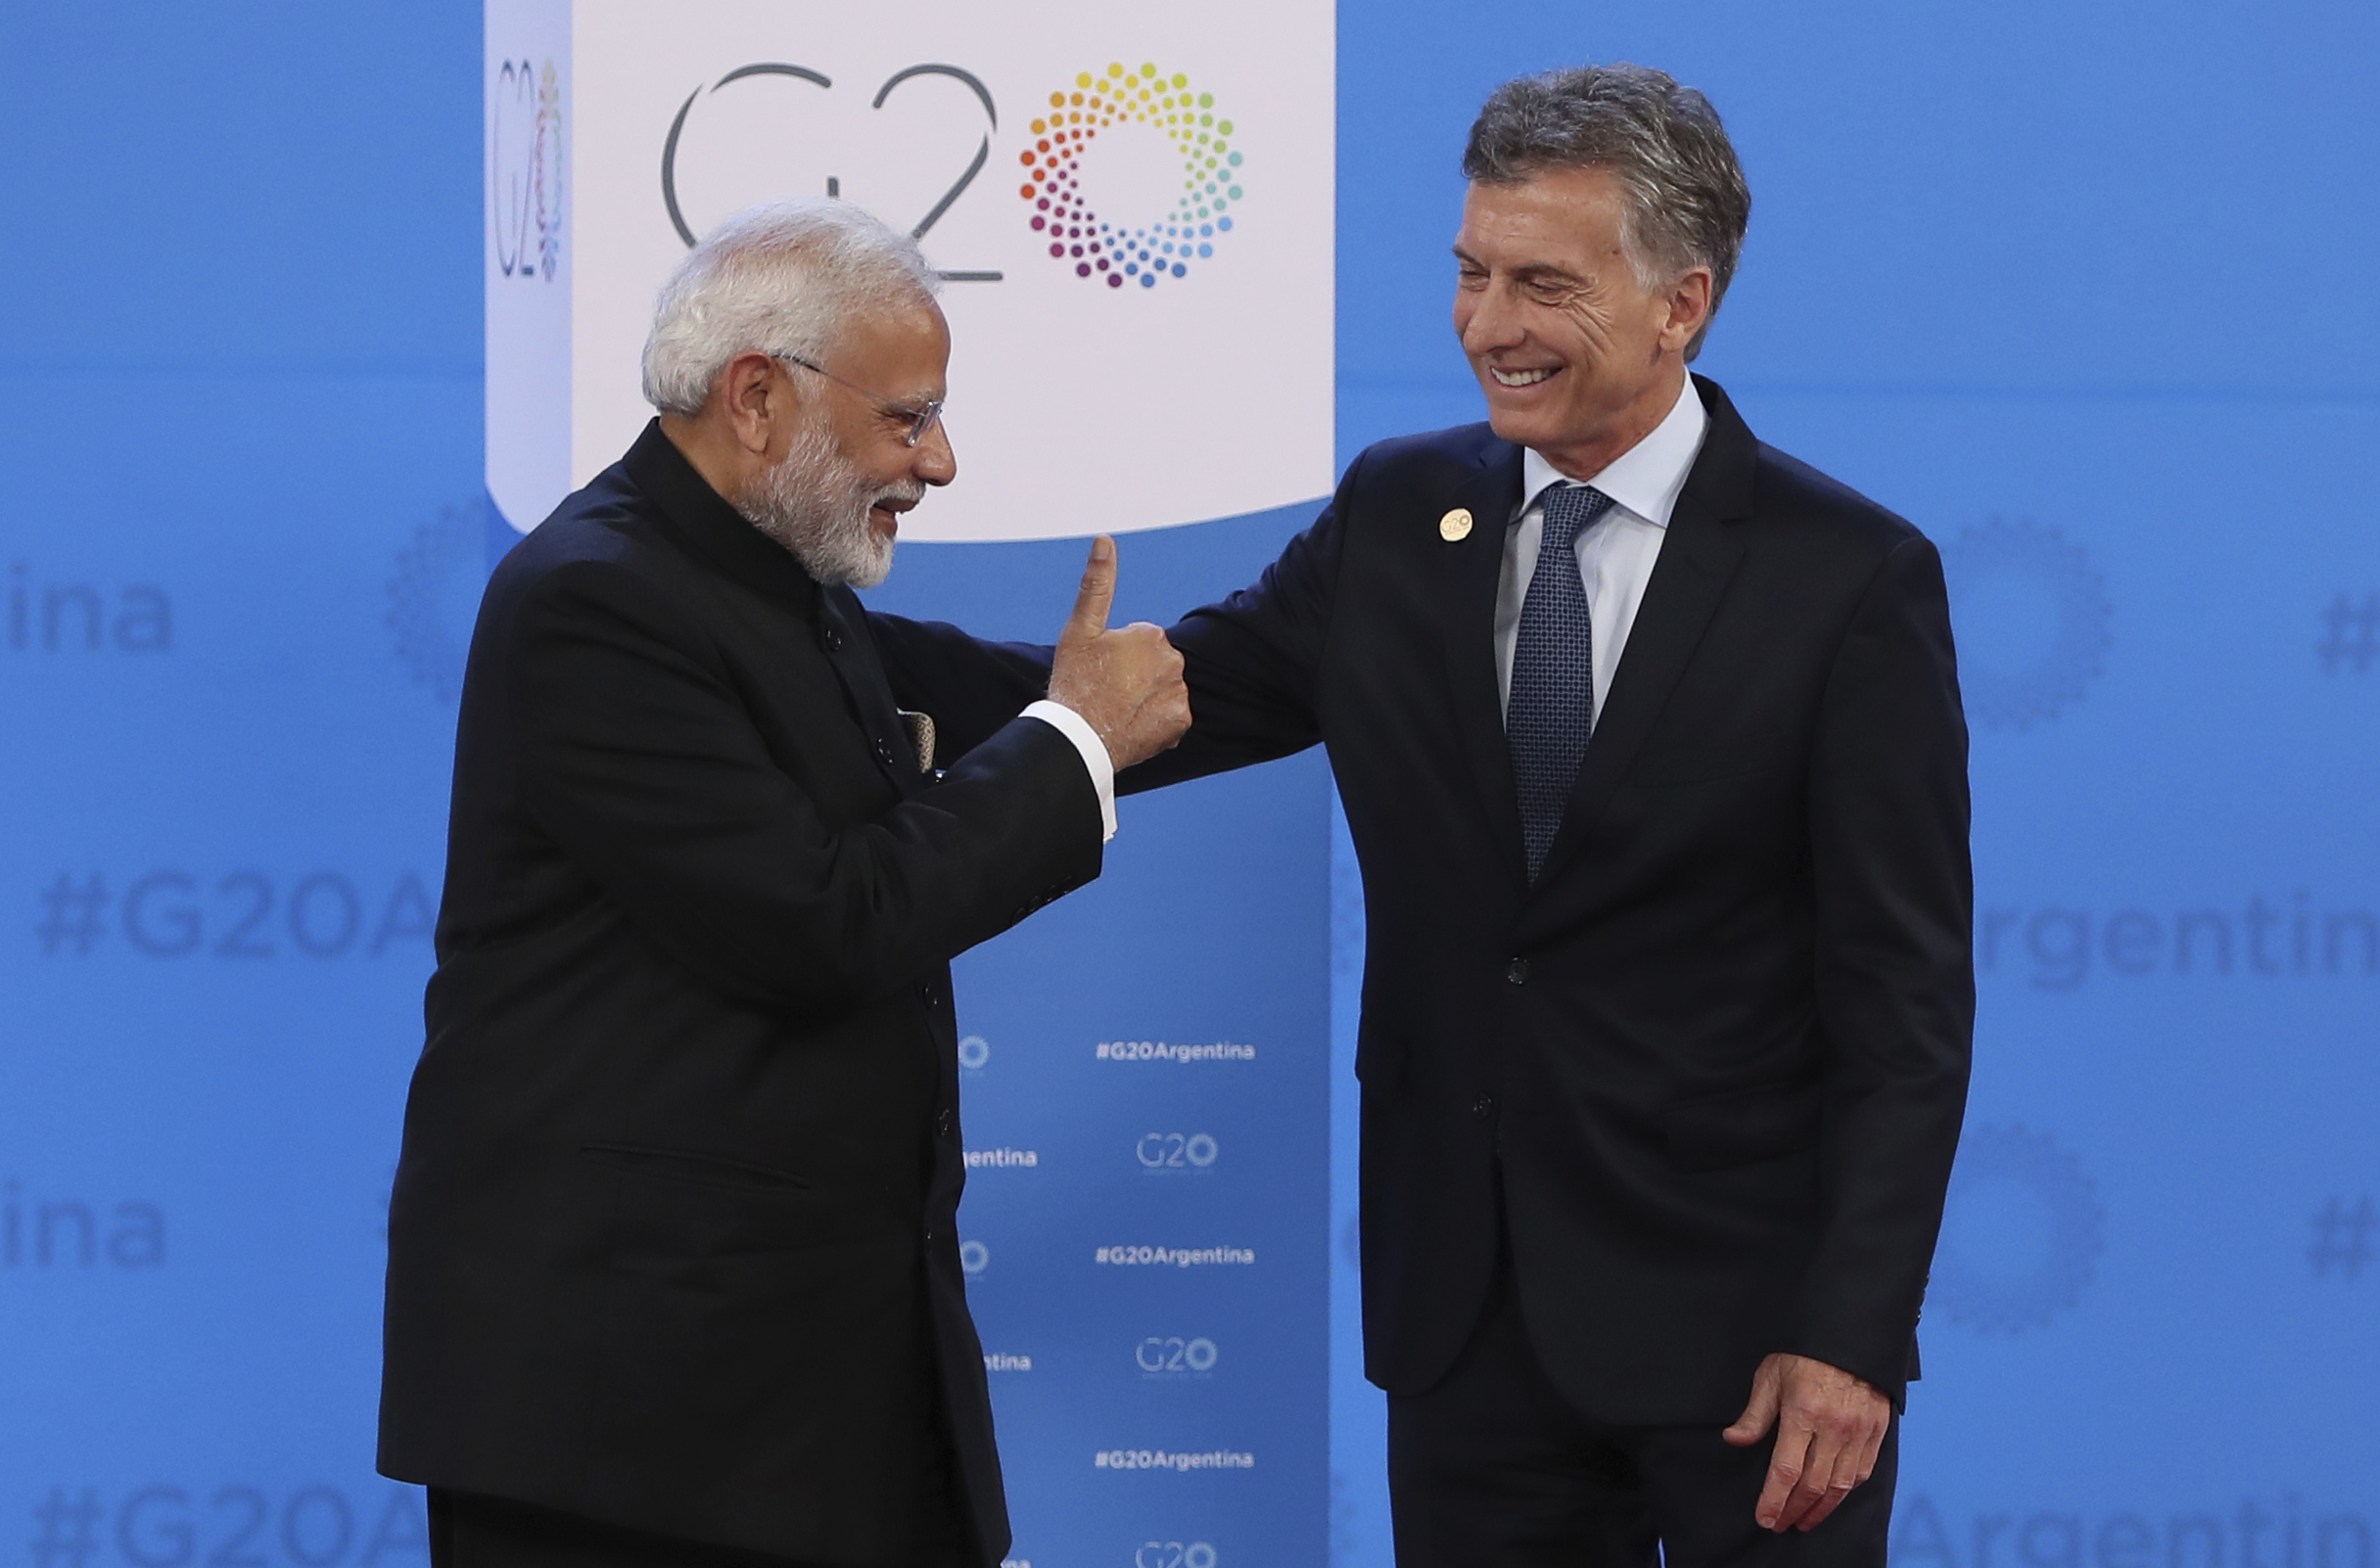 India's Prime Minister Narendra Modi gives a thumbs up as Argentina's President Mauricio Macri welcomes him to the start of the G20 summit in Buenos Aires - AP